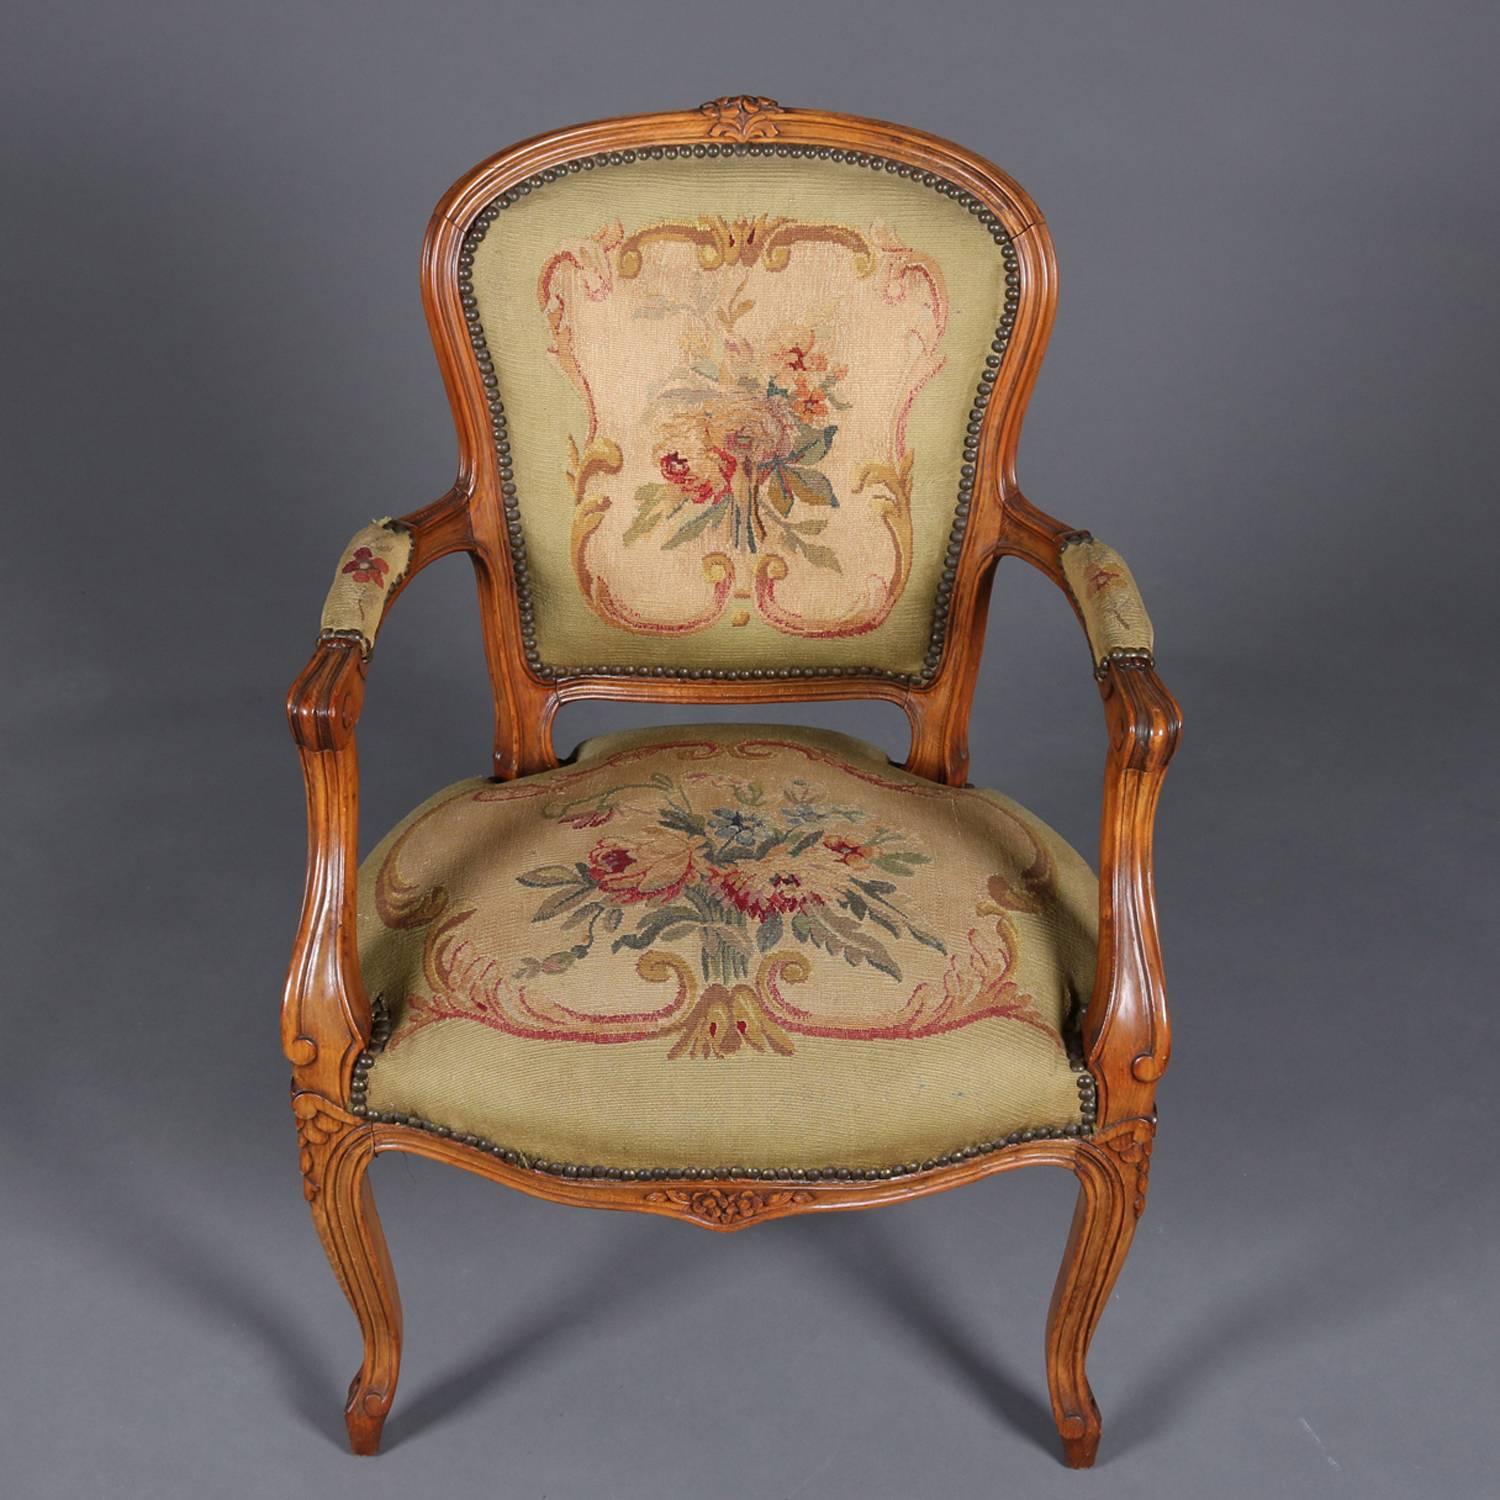 Vintage French Louis XV classical style upholstered Fauteuil armchair features carved maple frame with scroll arms and cabriole legs, tapestry with central design of European hand tied floral bouquet and scroll bordering on back and seat, circa